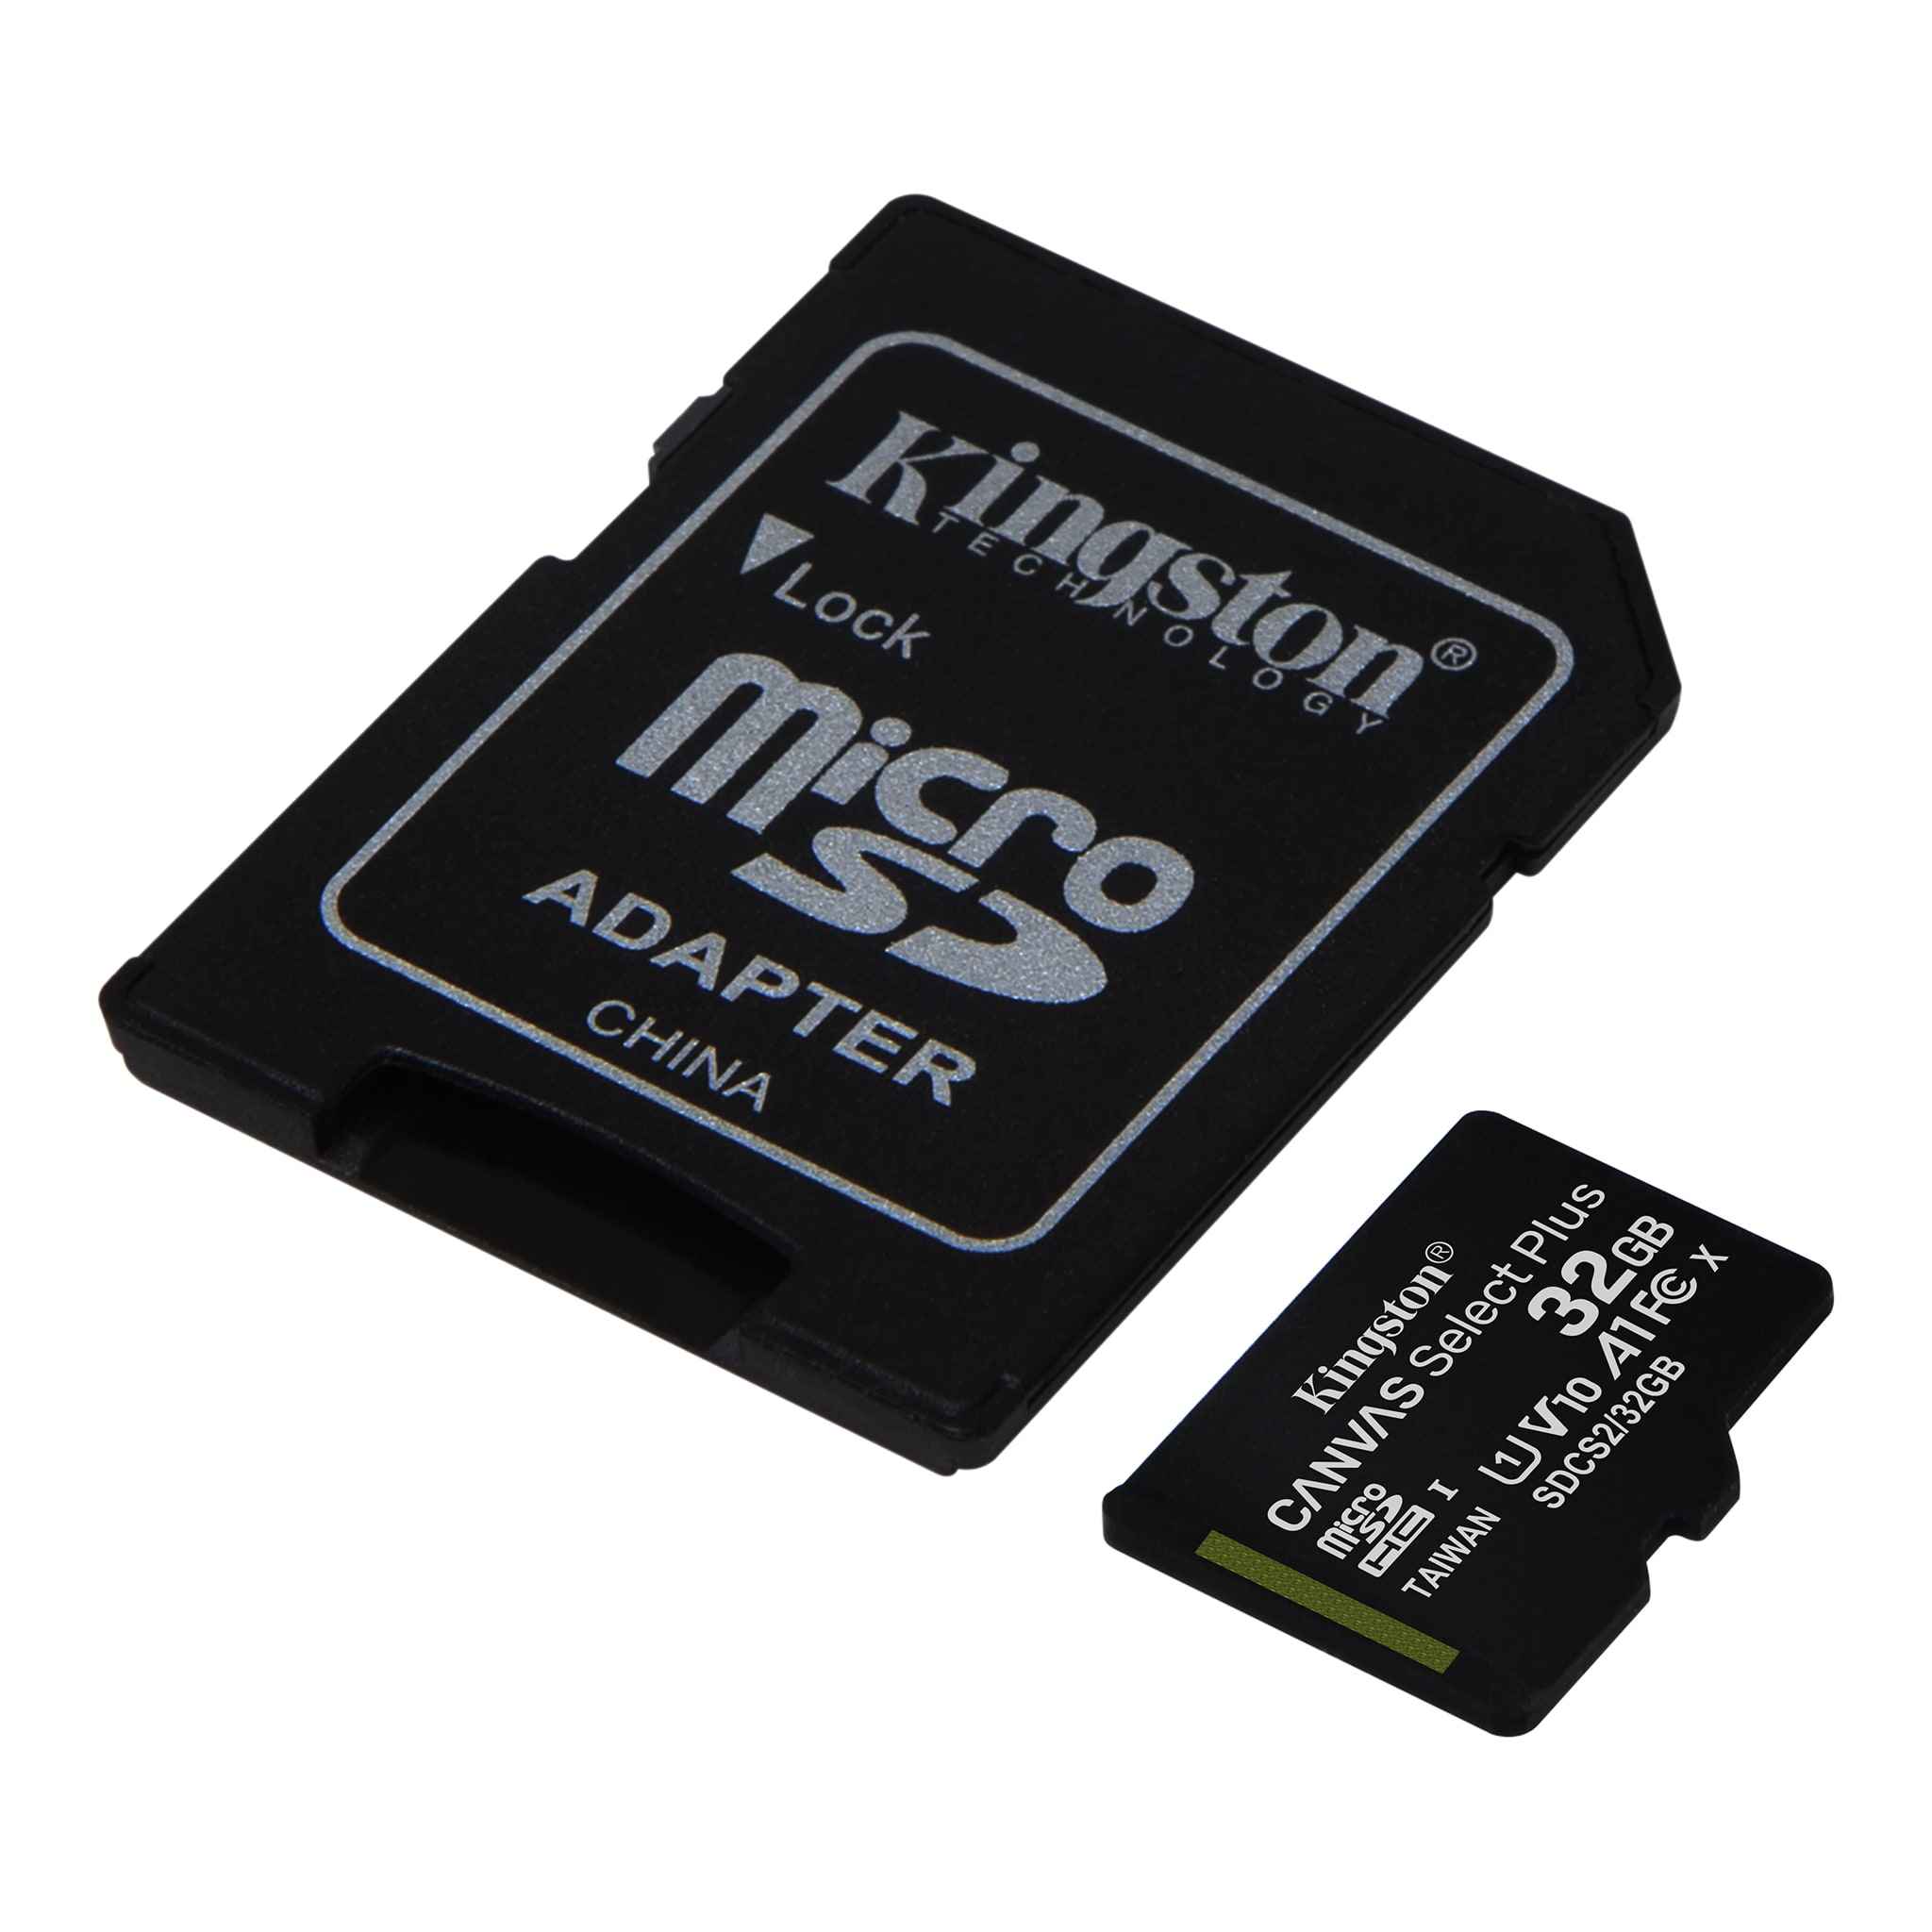 Kingston 512GB Karbonn A29 MicroSDXC Canvas Select Plus Card Verified by SanFlash. 100MBs Works with Kingston